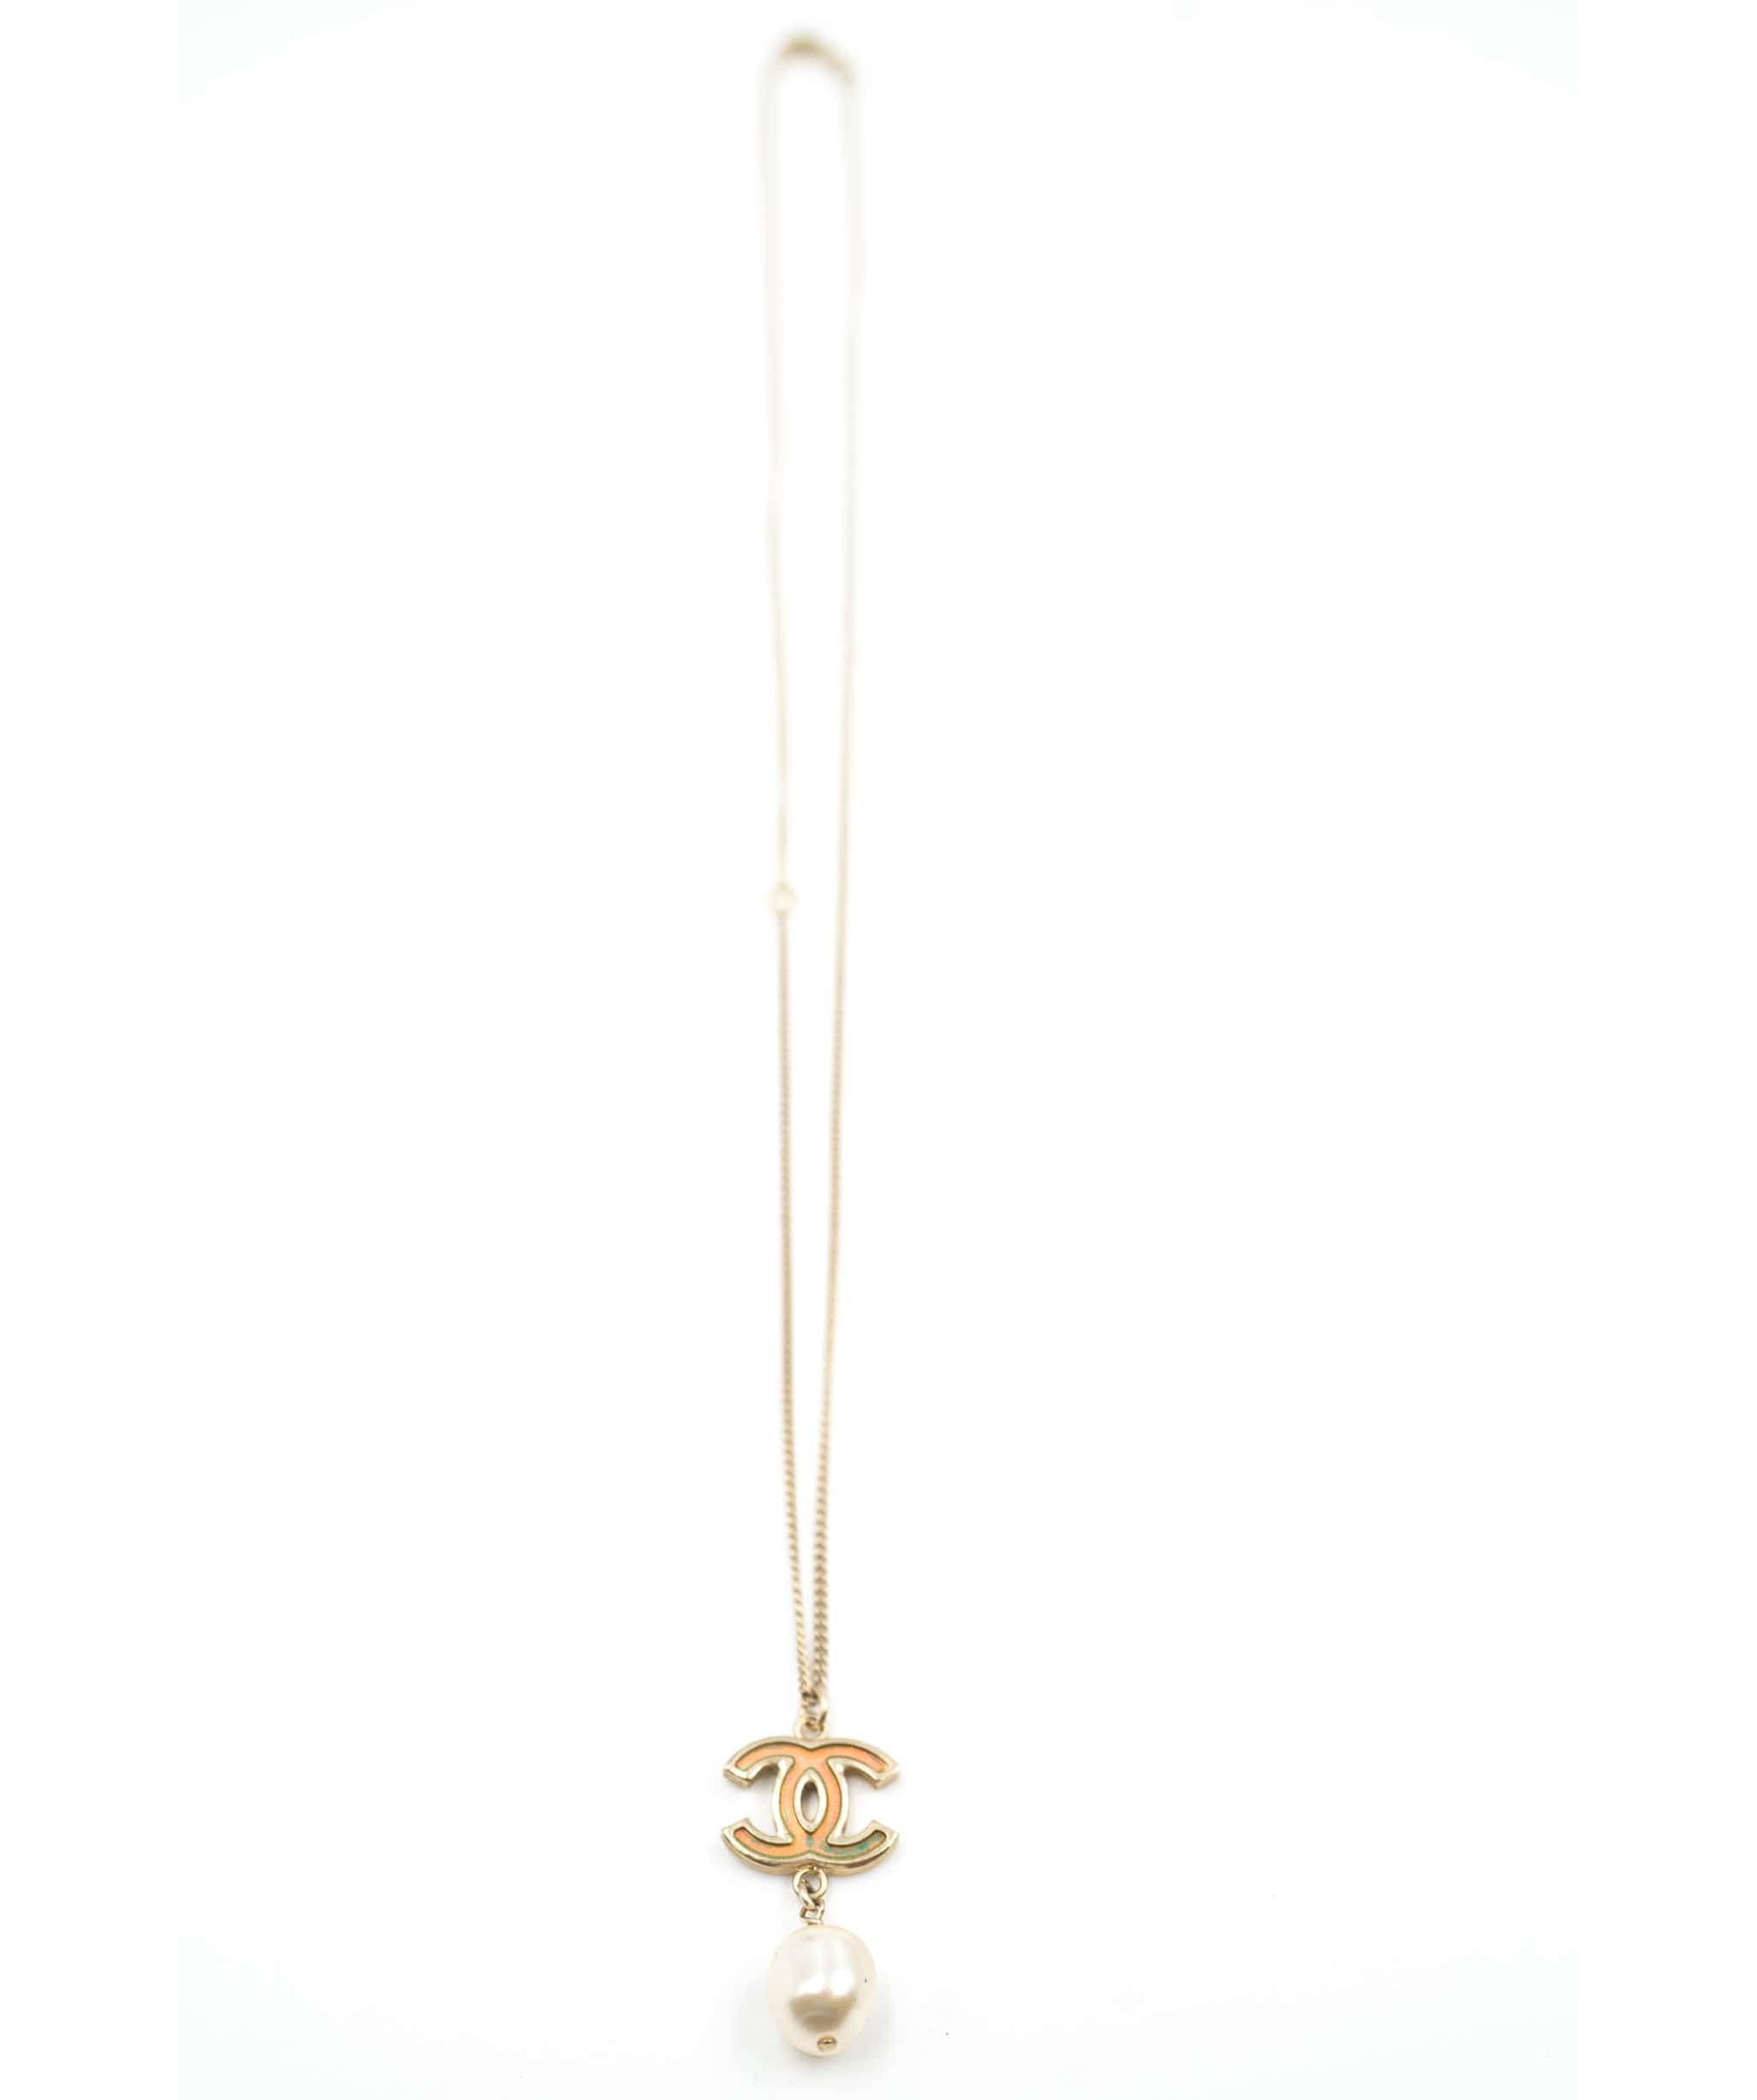 Chanel Champagne Gold Plated CC Faux Pearl Pendant Necklace